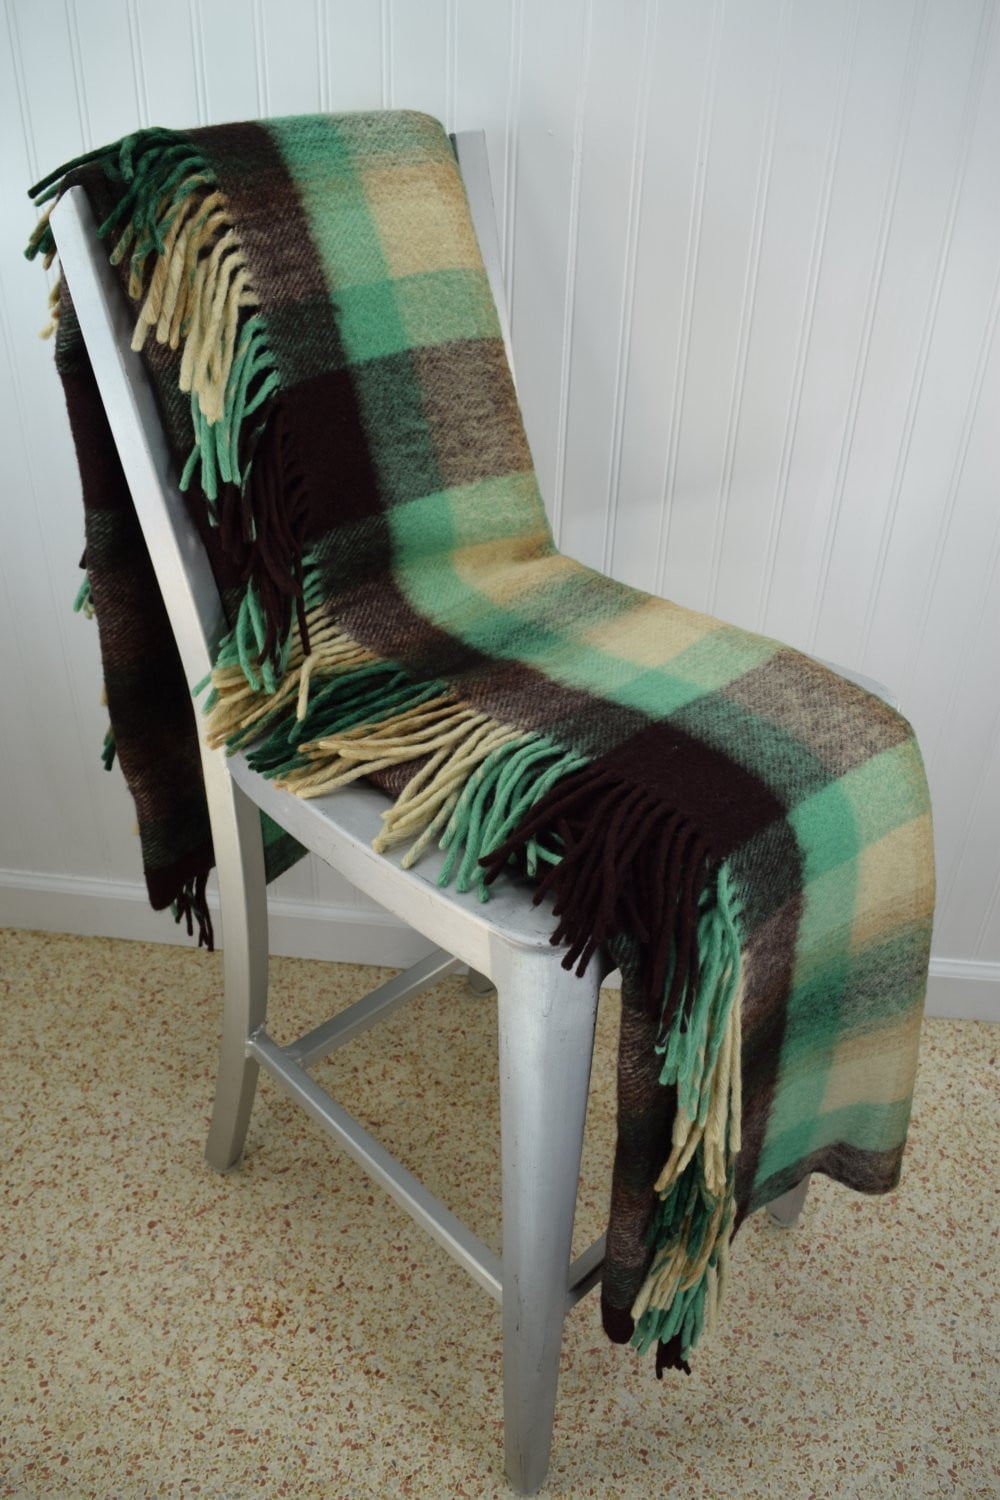 WAVERLEY Vintage Plaid Blanket Large Fringed Throw South Africa Made heavy